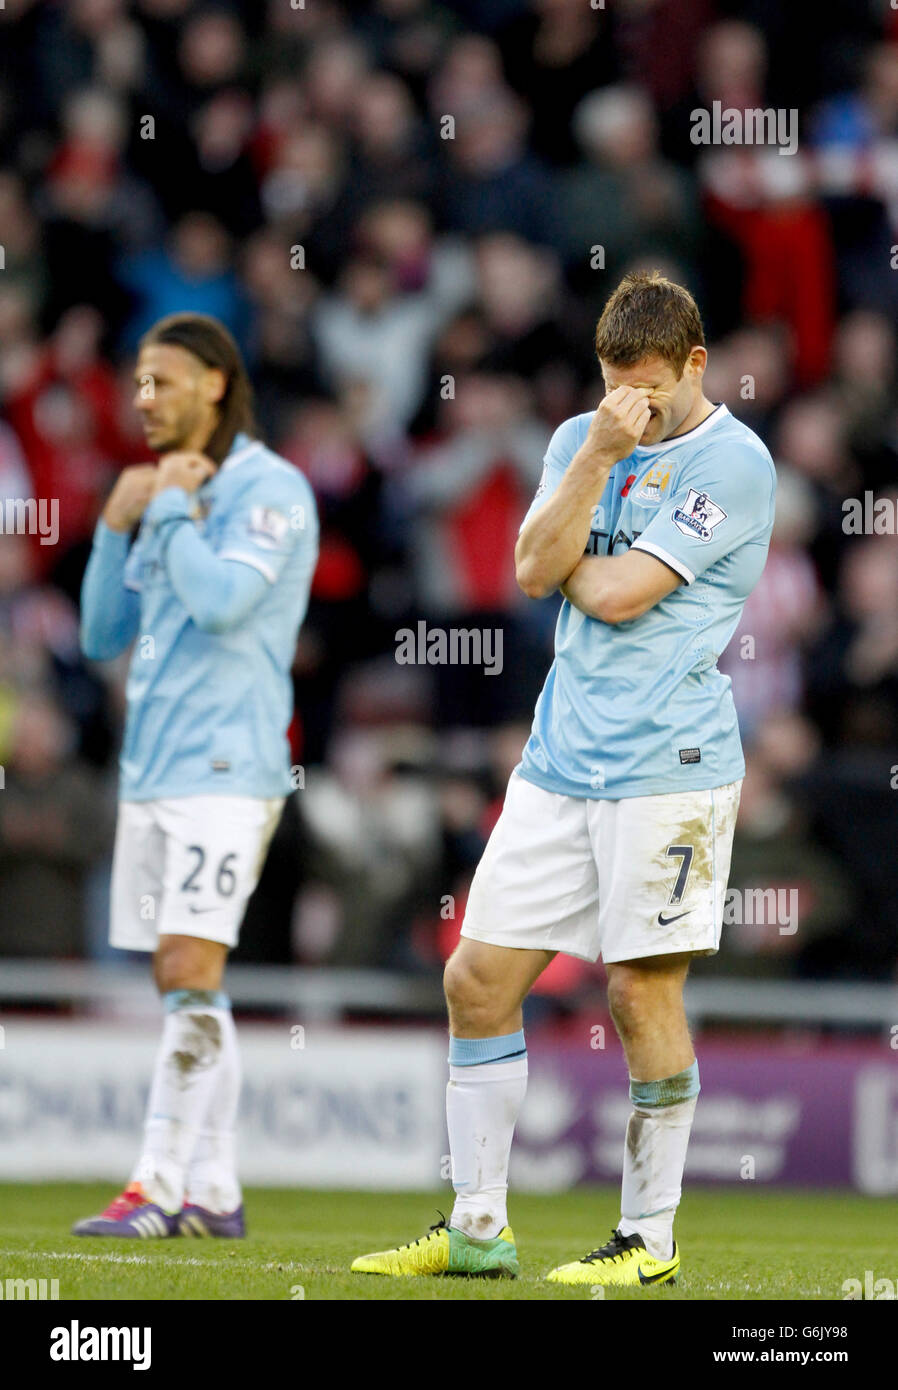 Soccer - Barclays Premier League - Sunderland v Manchester City - Stadium of Light. Manchester City's James Milner (right) and Martin Demichelis dejected after the final whistle Stock Photo